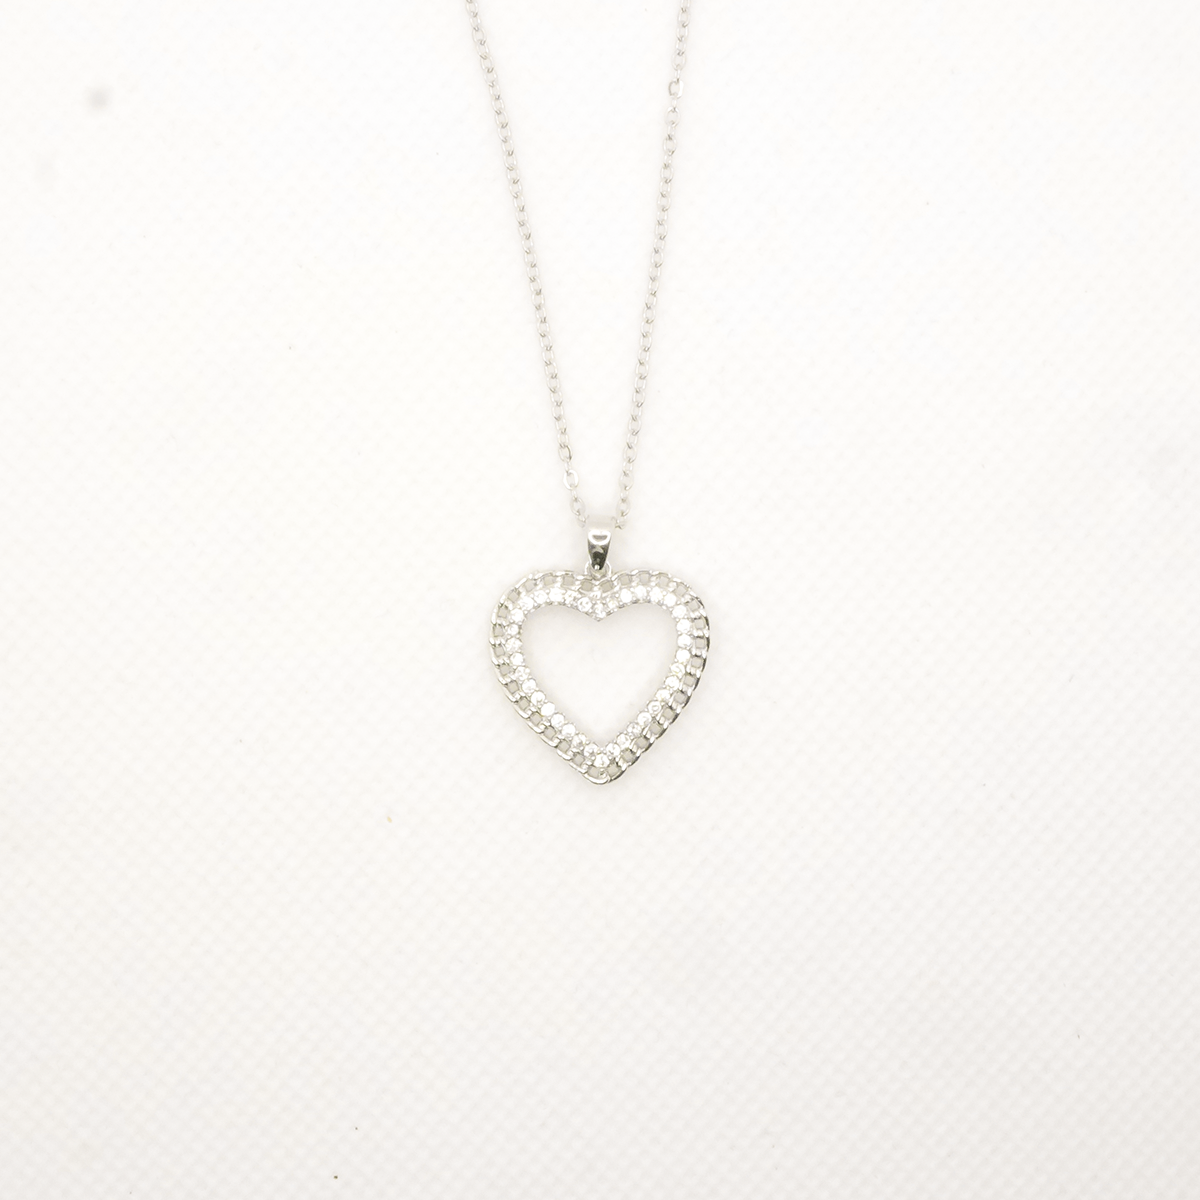 Lineheart Necklace